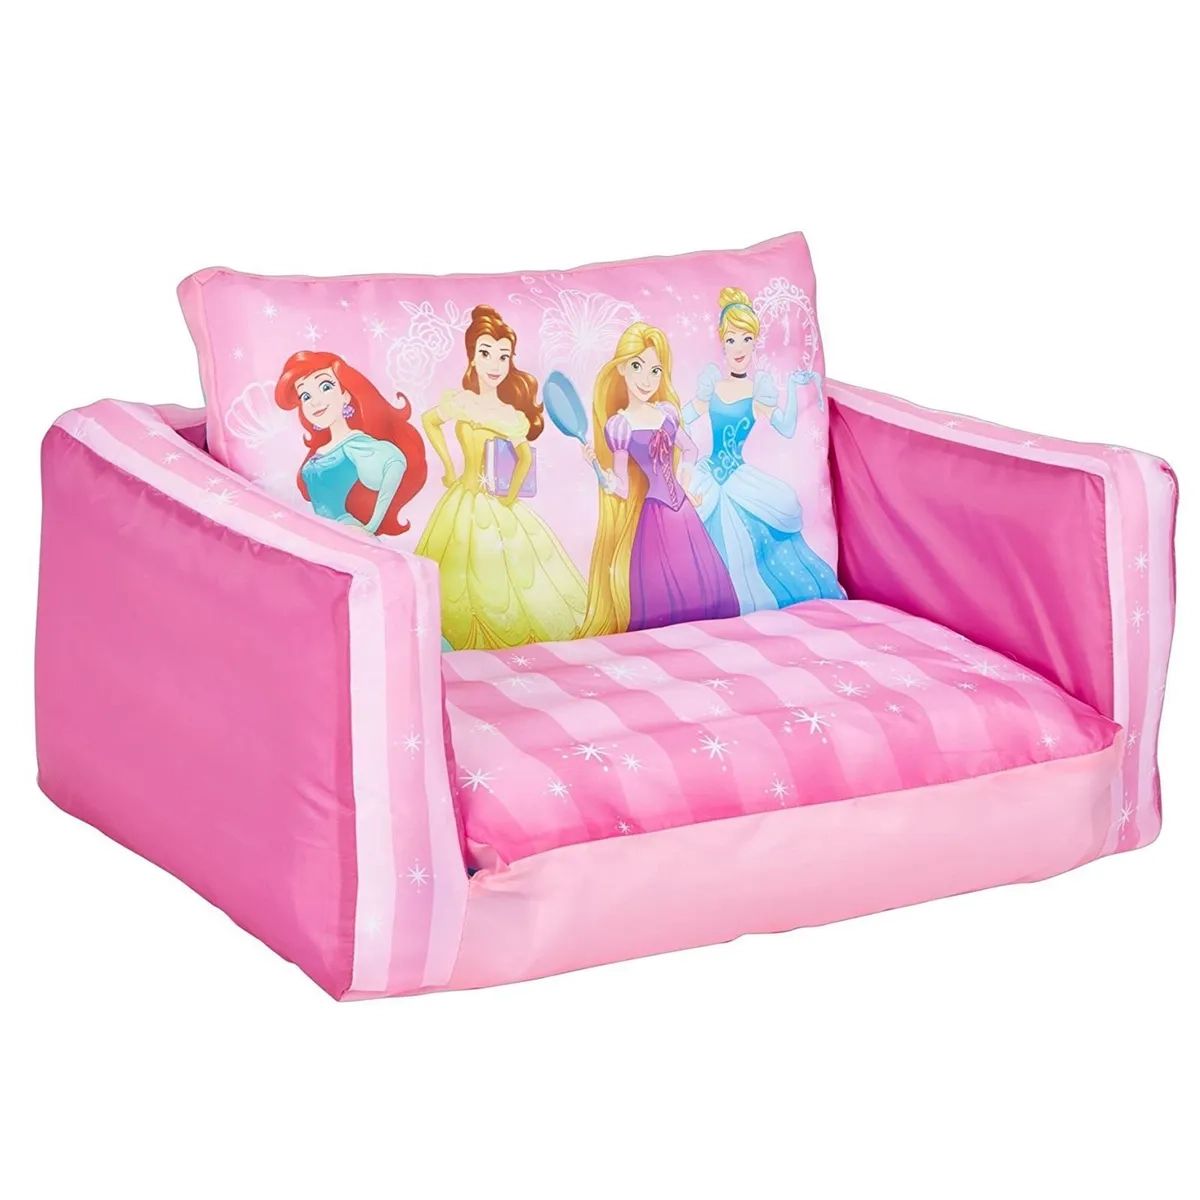 Disney Princess Flip Out Sofa Kids Inflatable Belle Cinderella Rapunzel  Pink New | Ebay Pertaining To Children'S Sofa Beds (View 14 of 15)